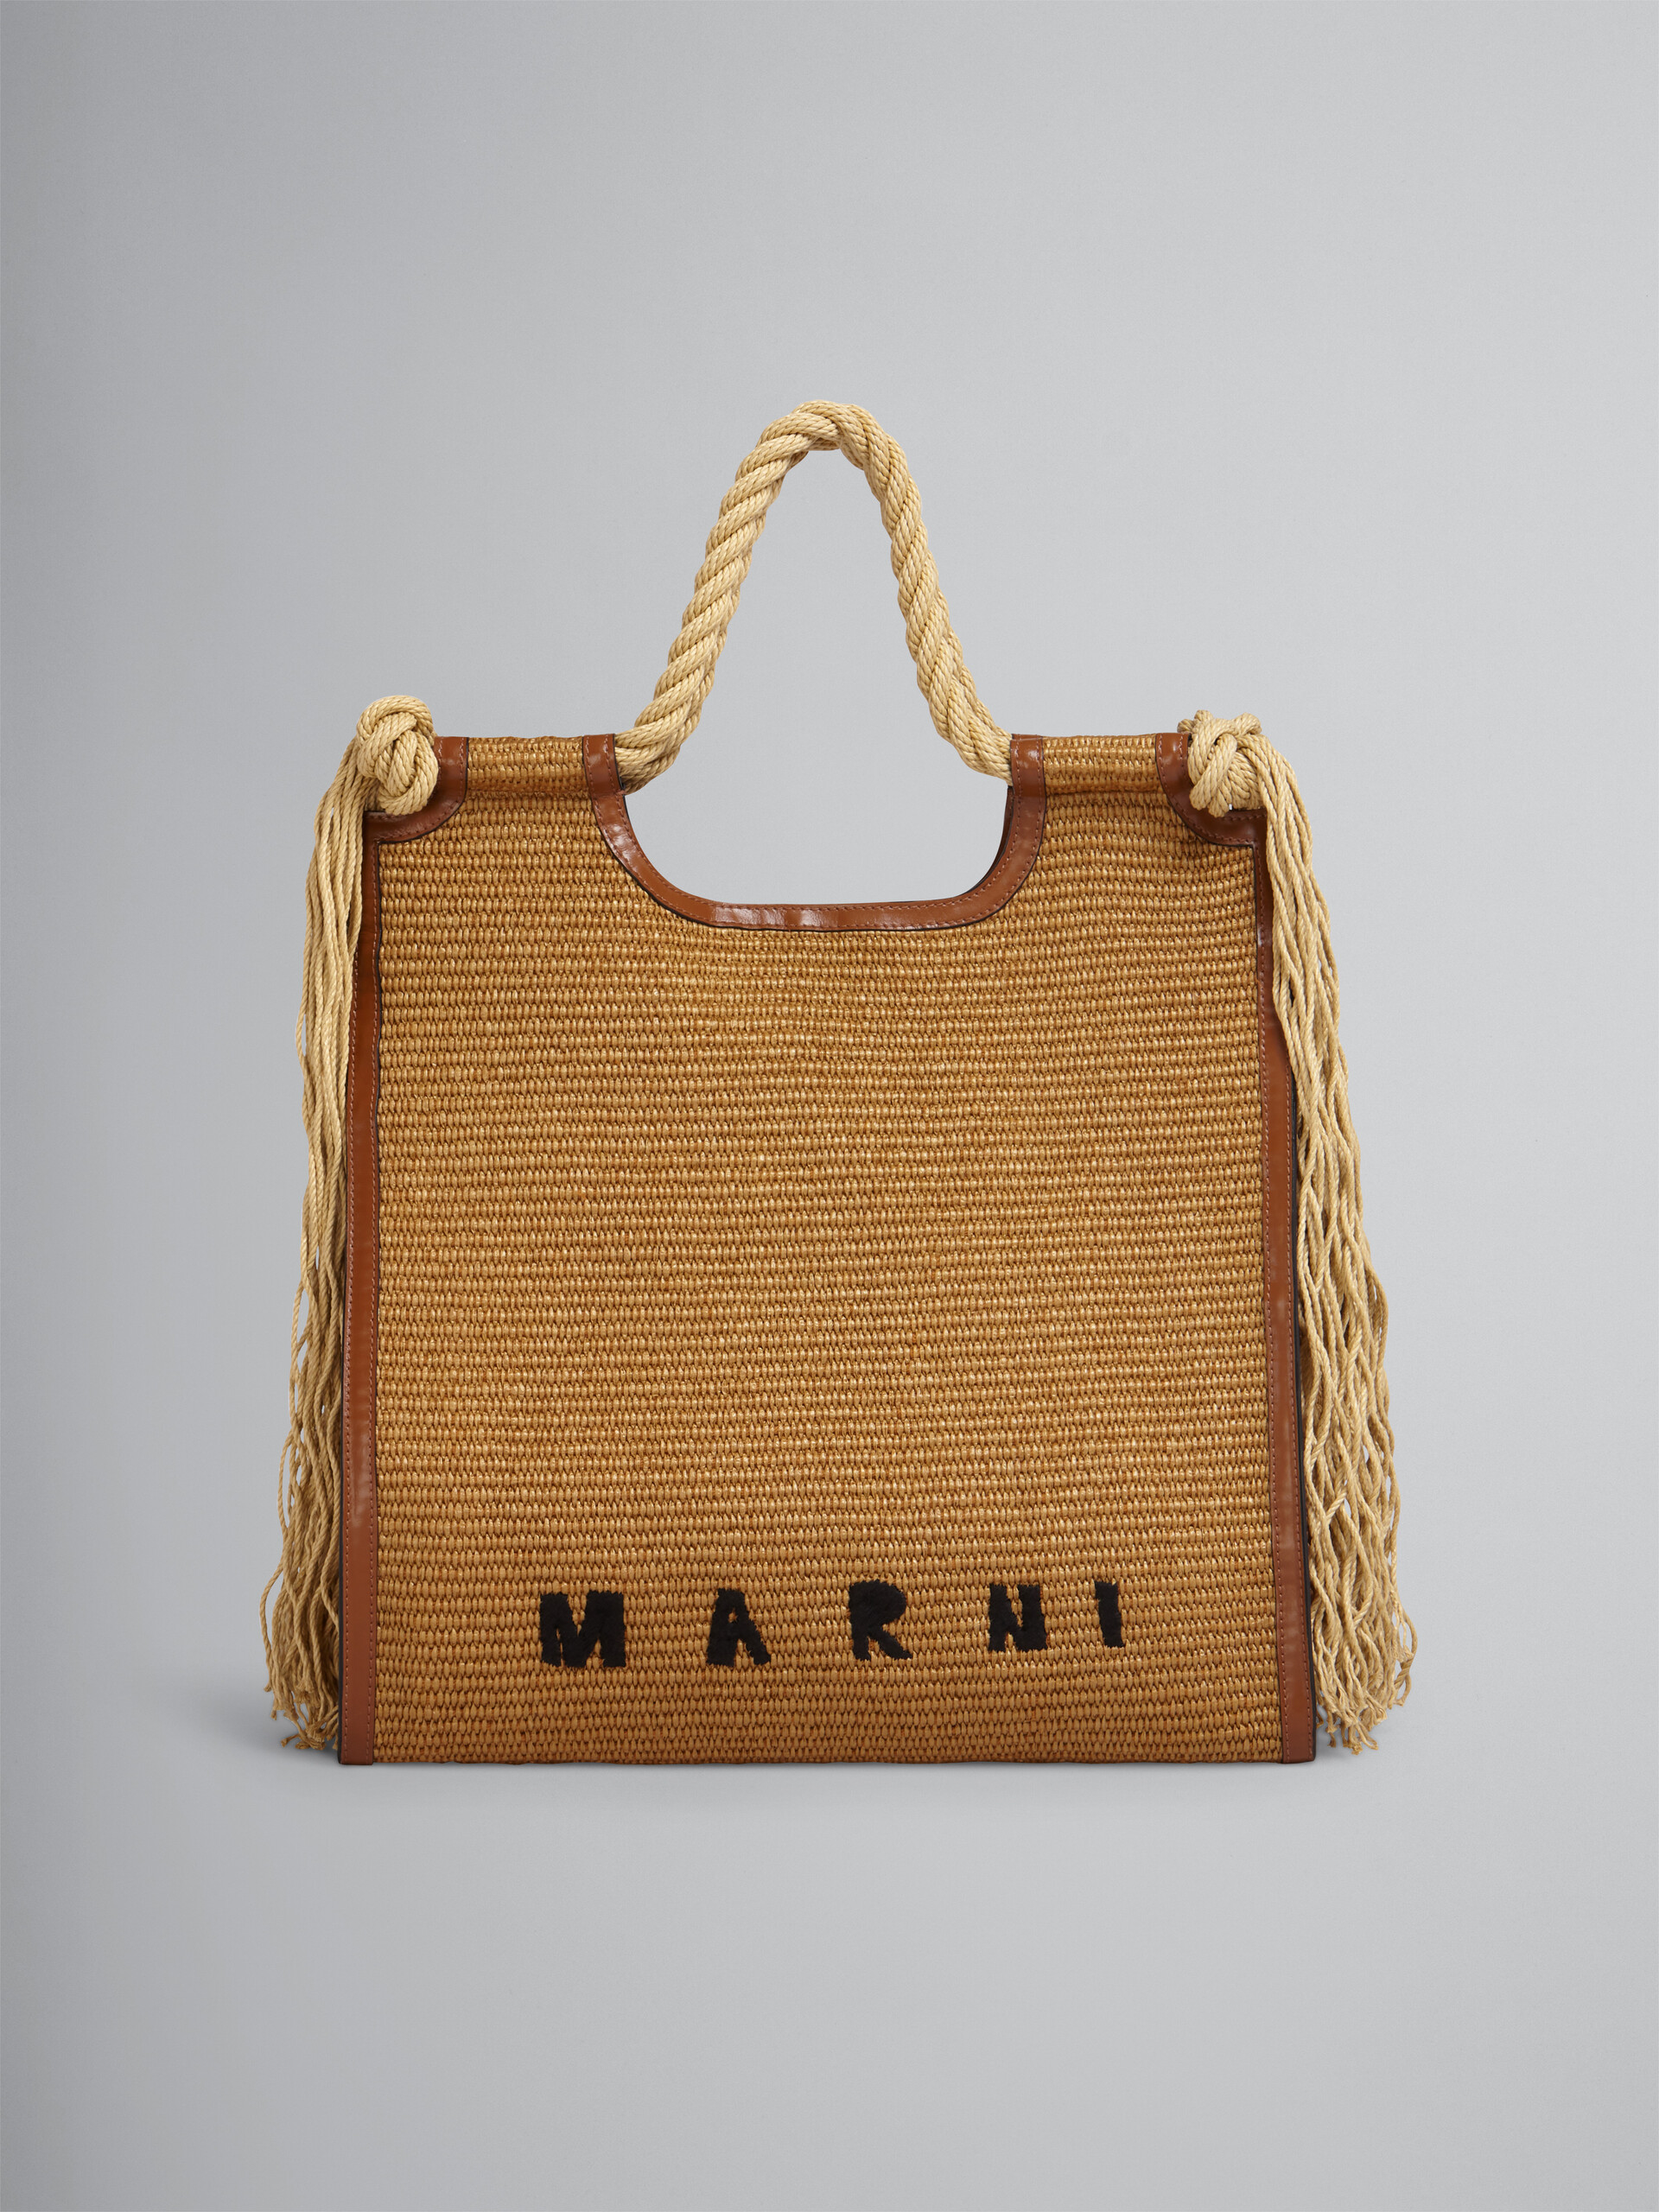 Marcel summer bag in brown leather and raffia with rope handles - Handbags - Image 1